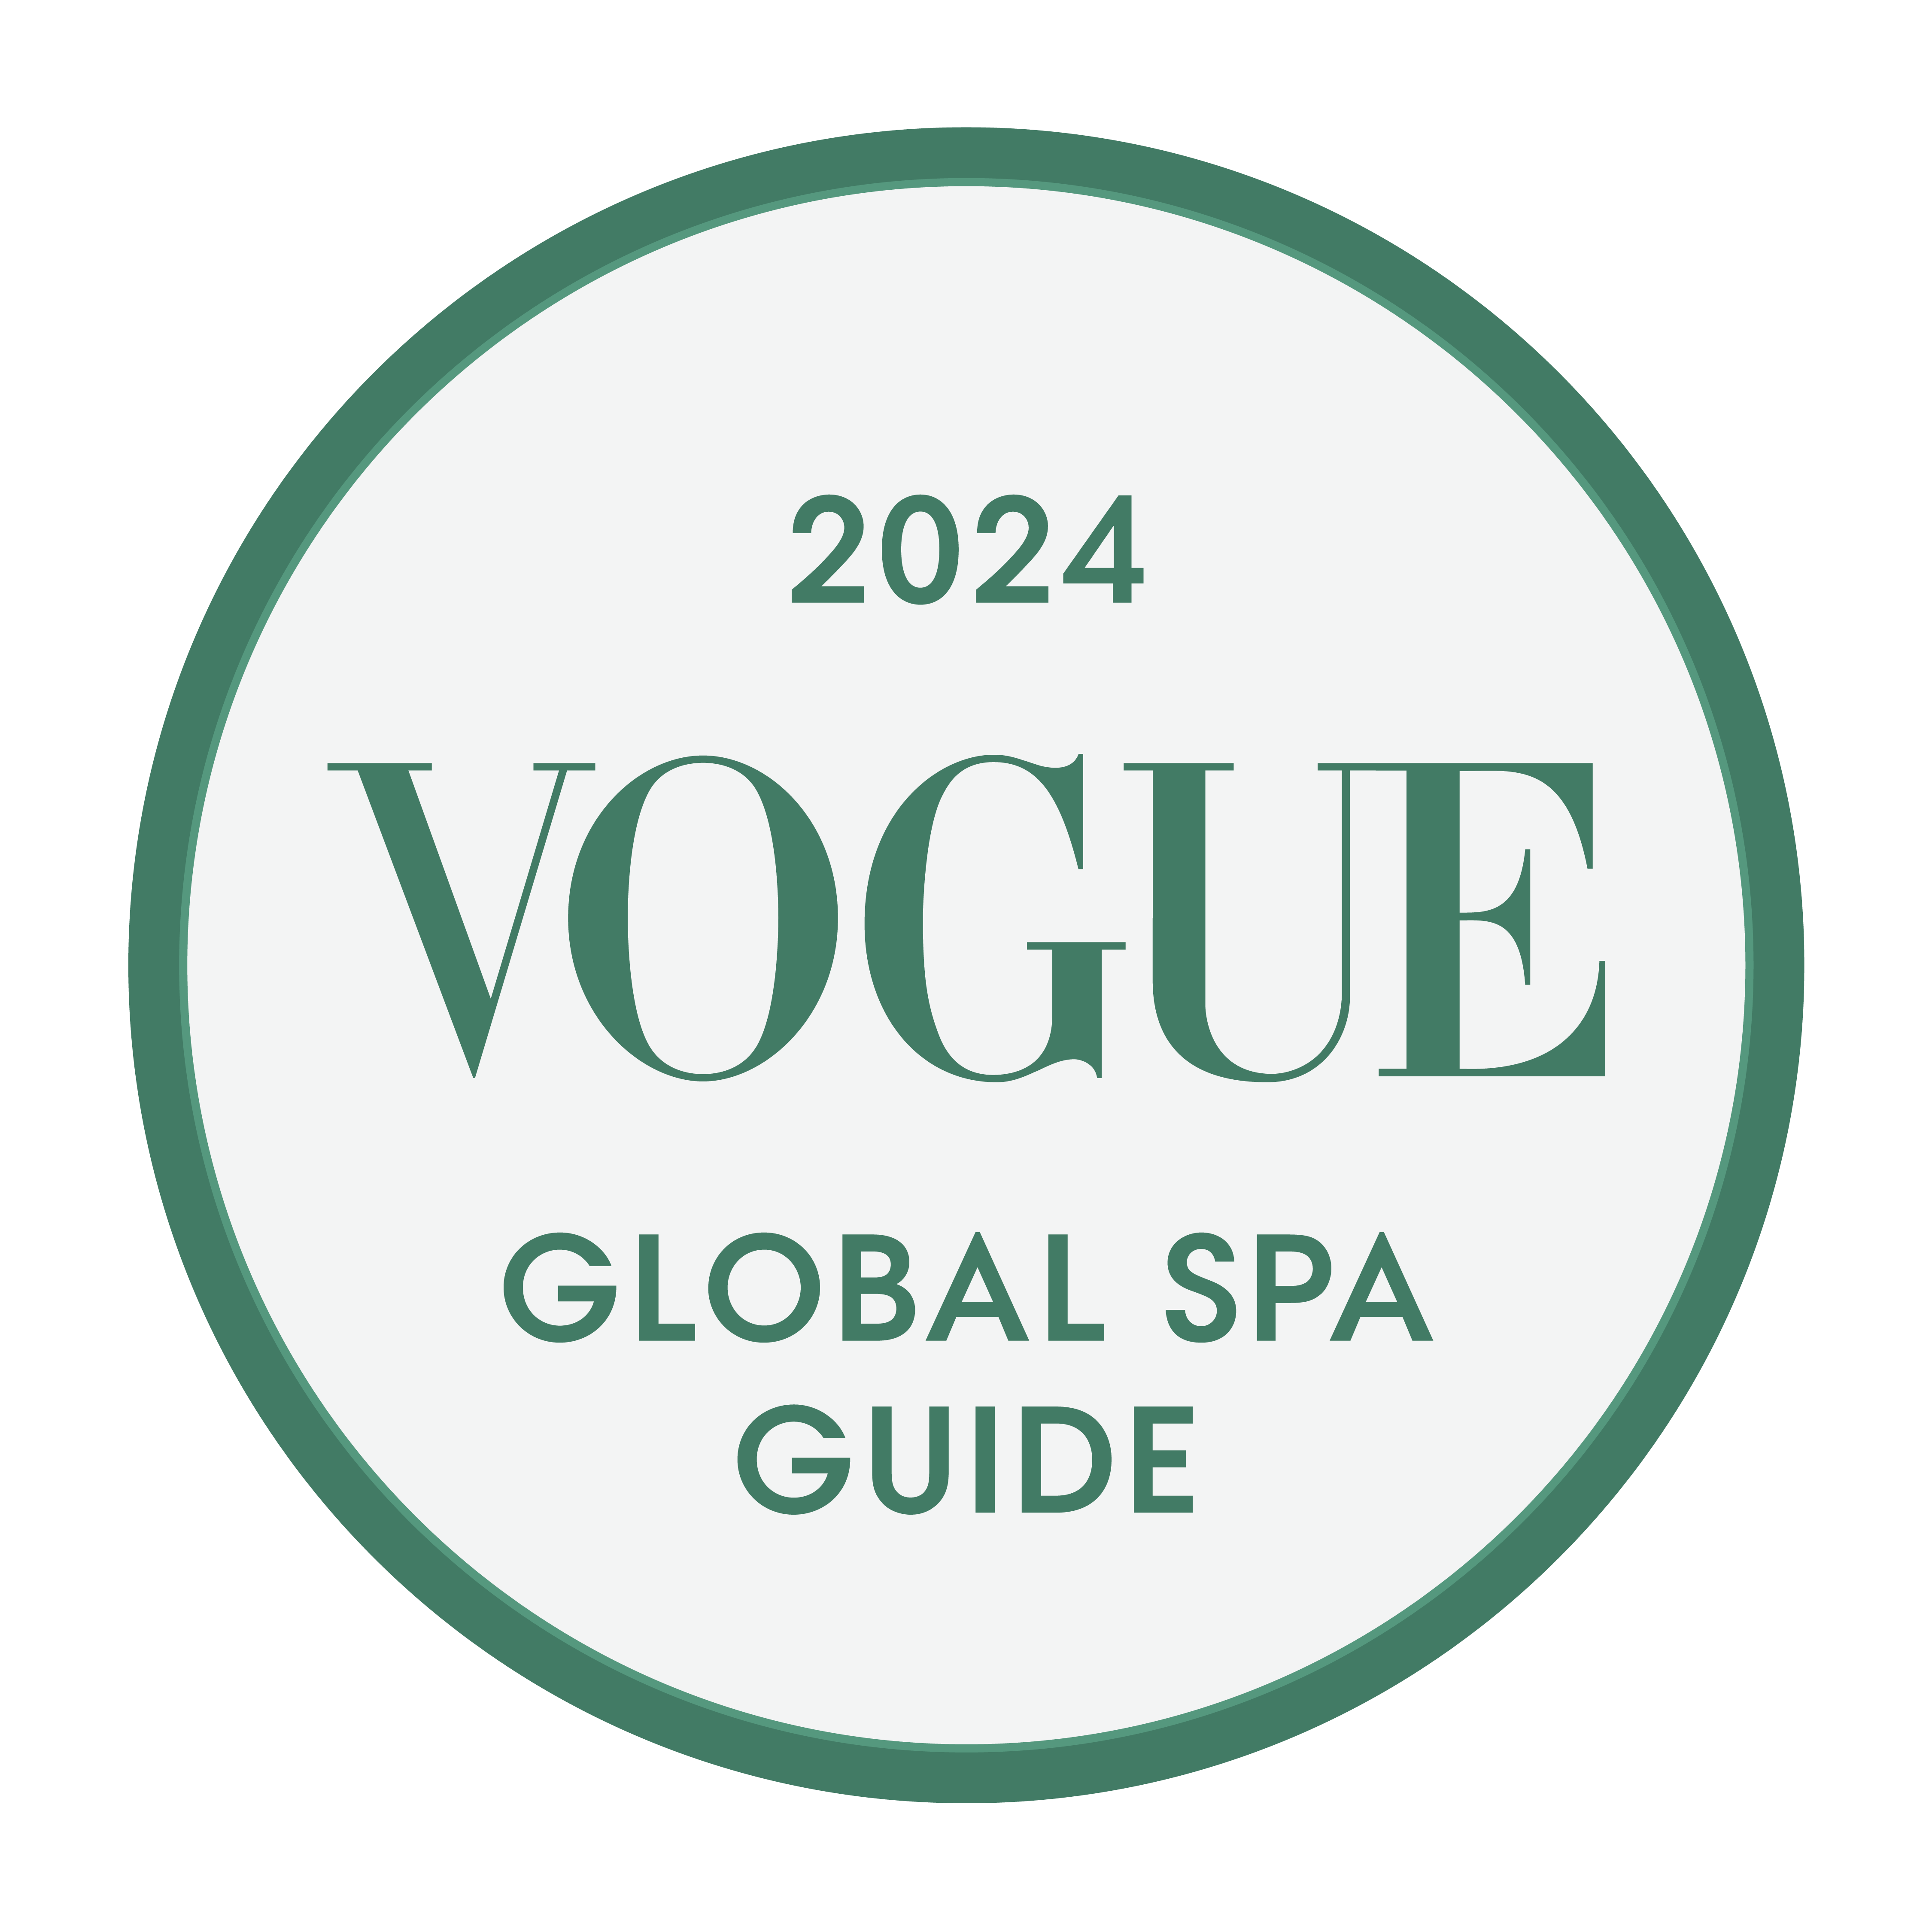 Vogue Global Spa Guide